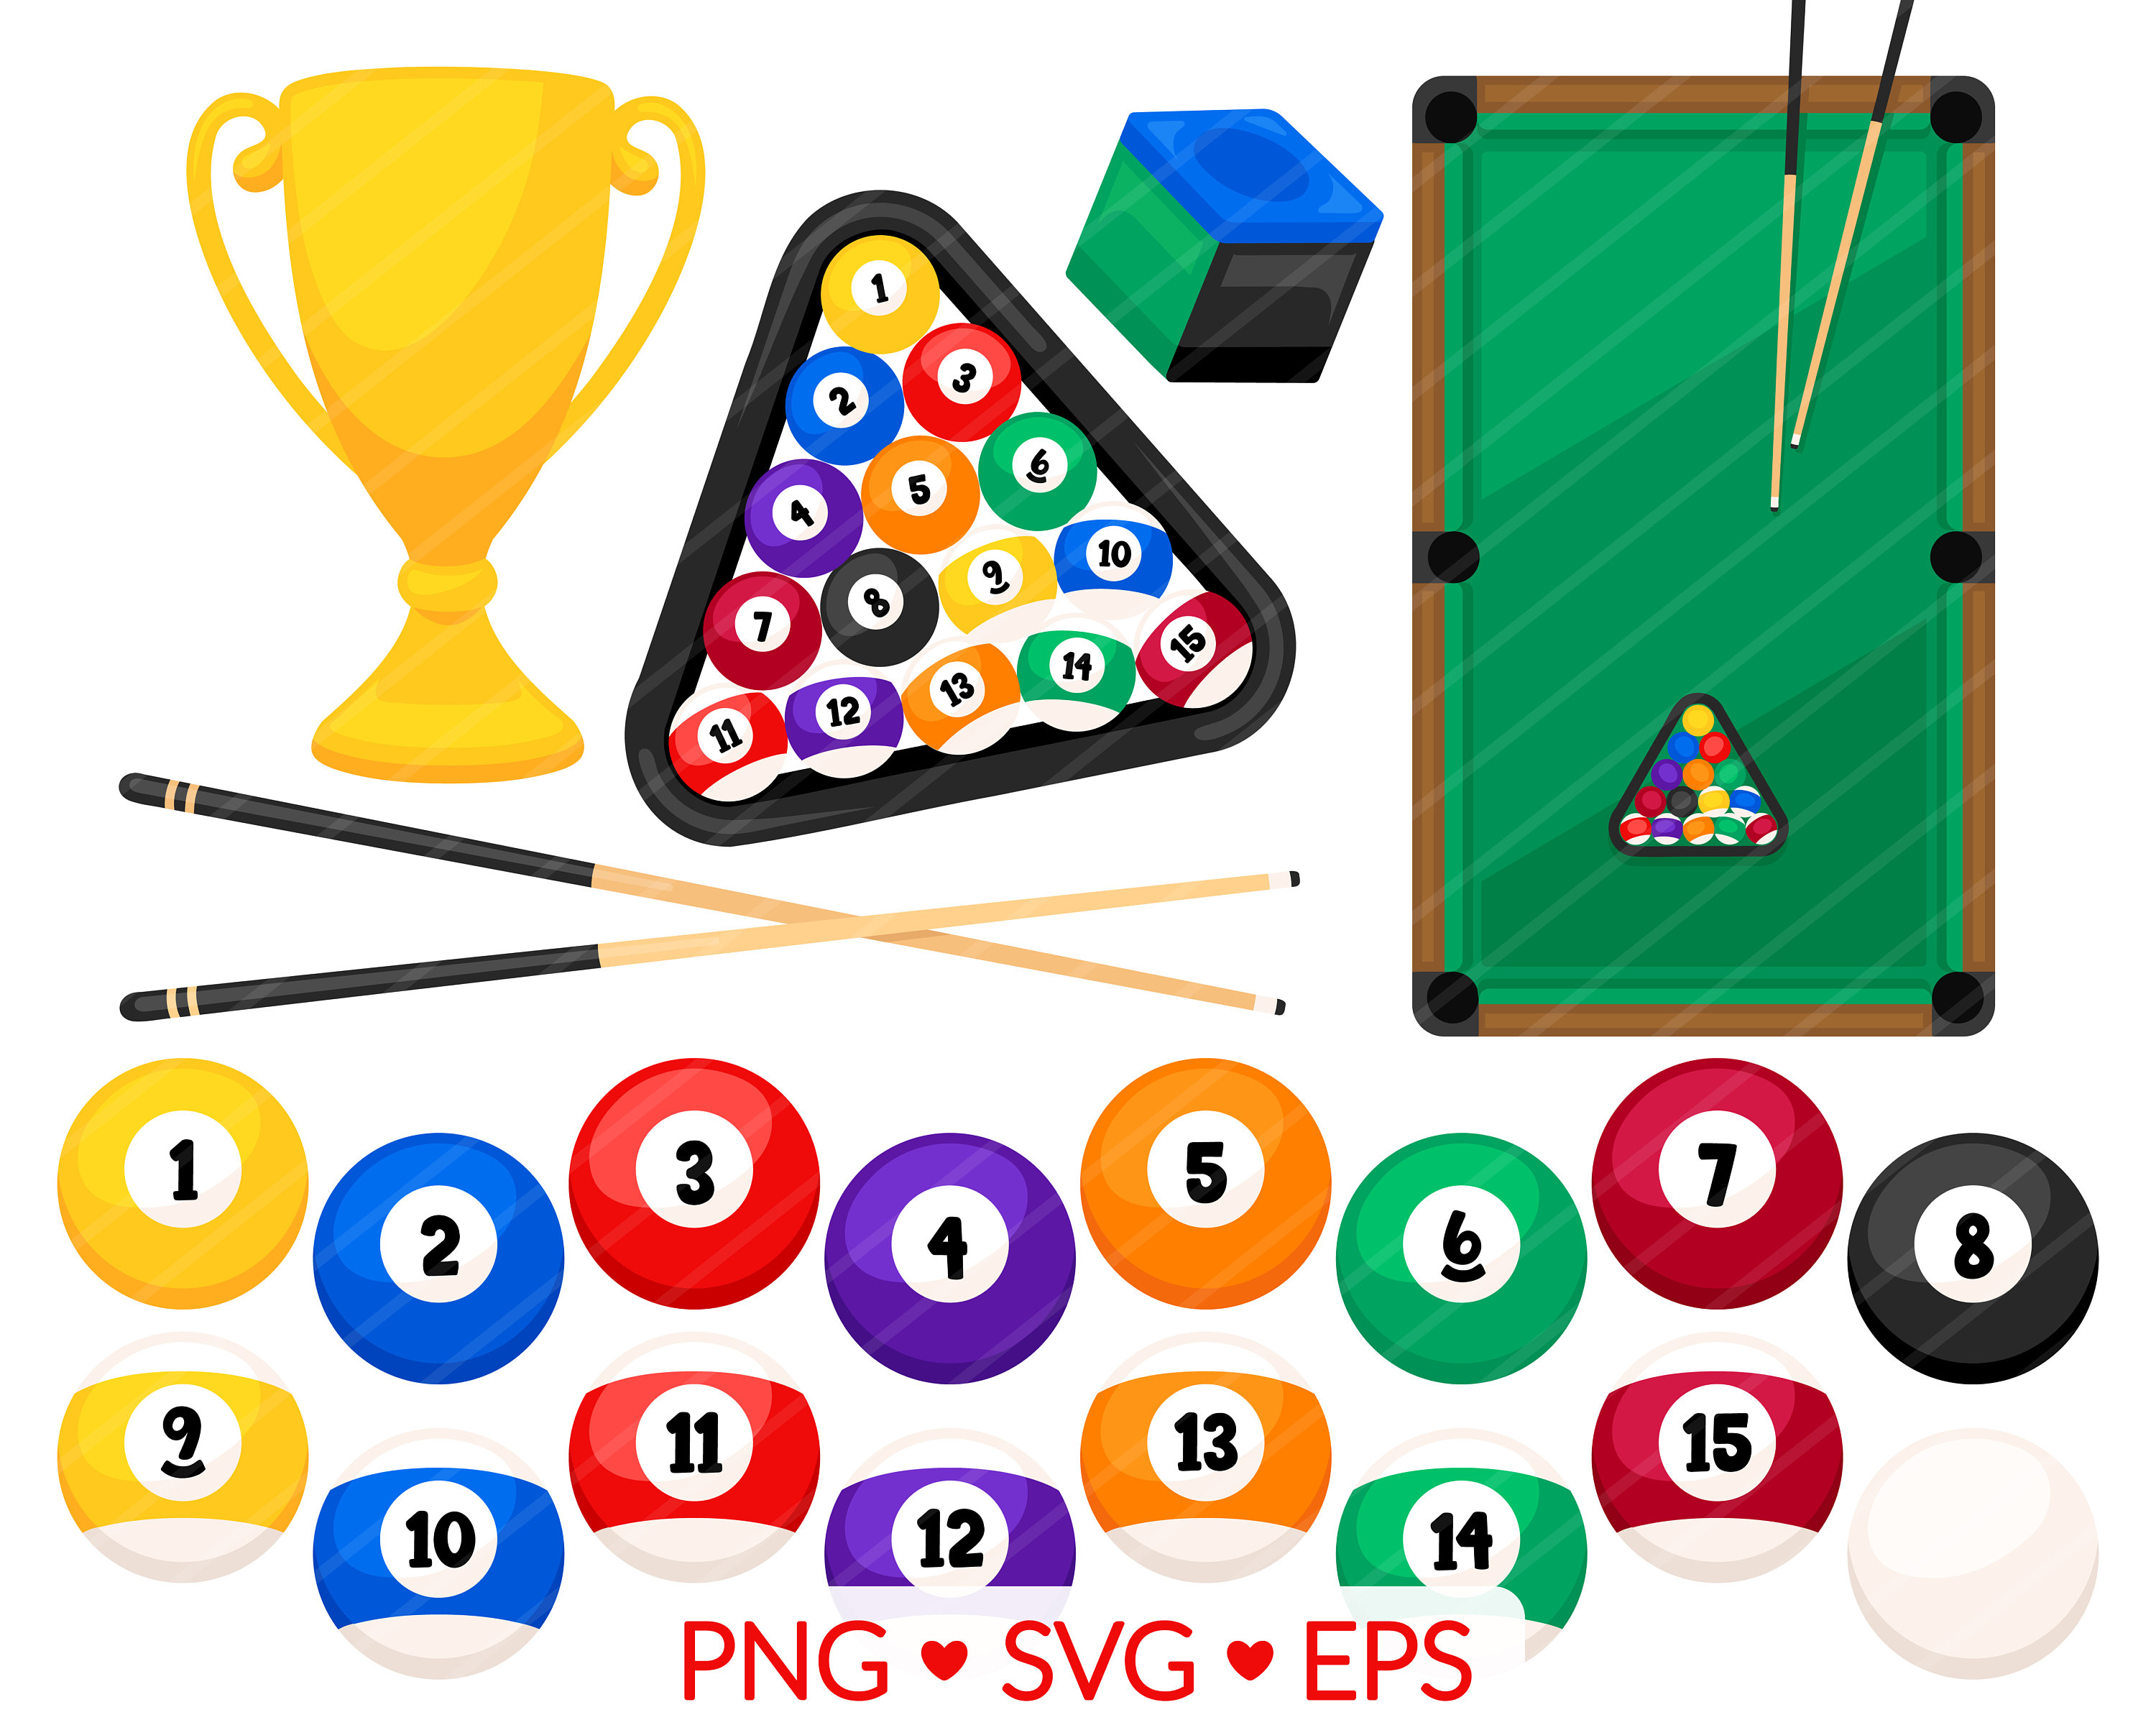 8 Ball Pool Cue Billiards Vector .eps .dxf Svg & a .png 